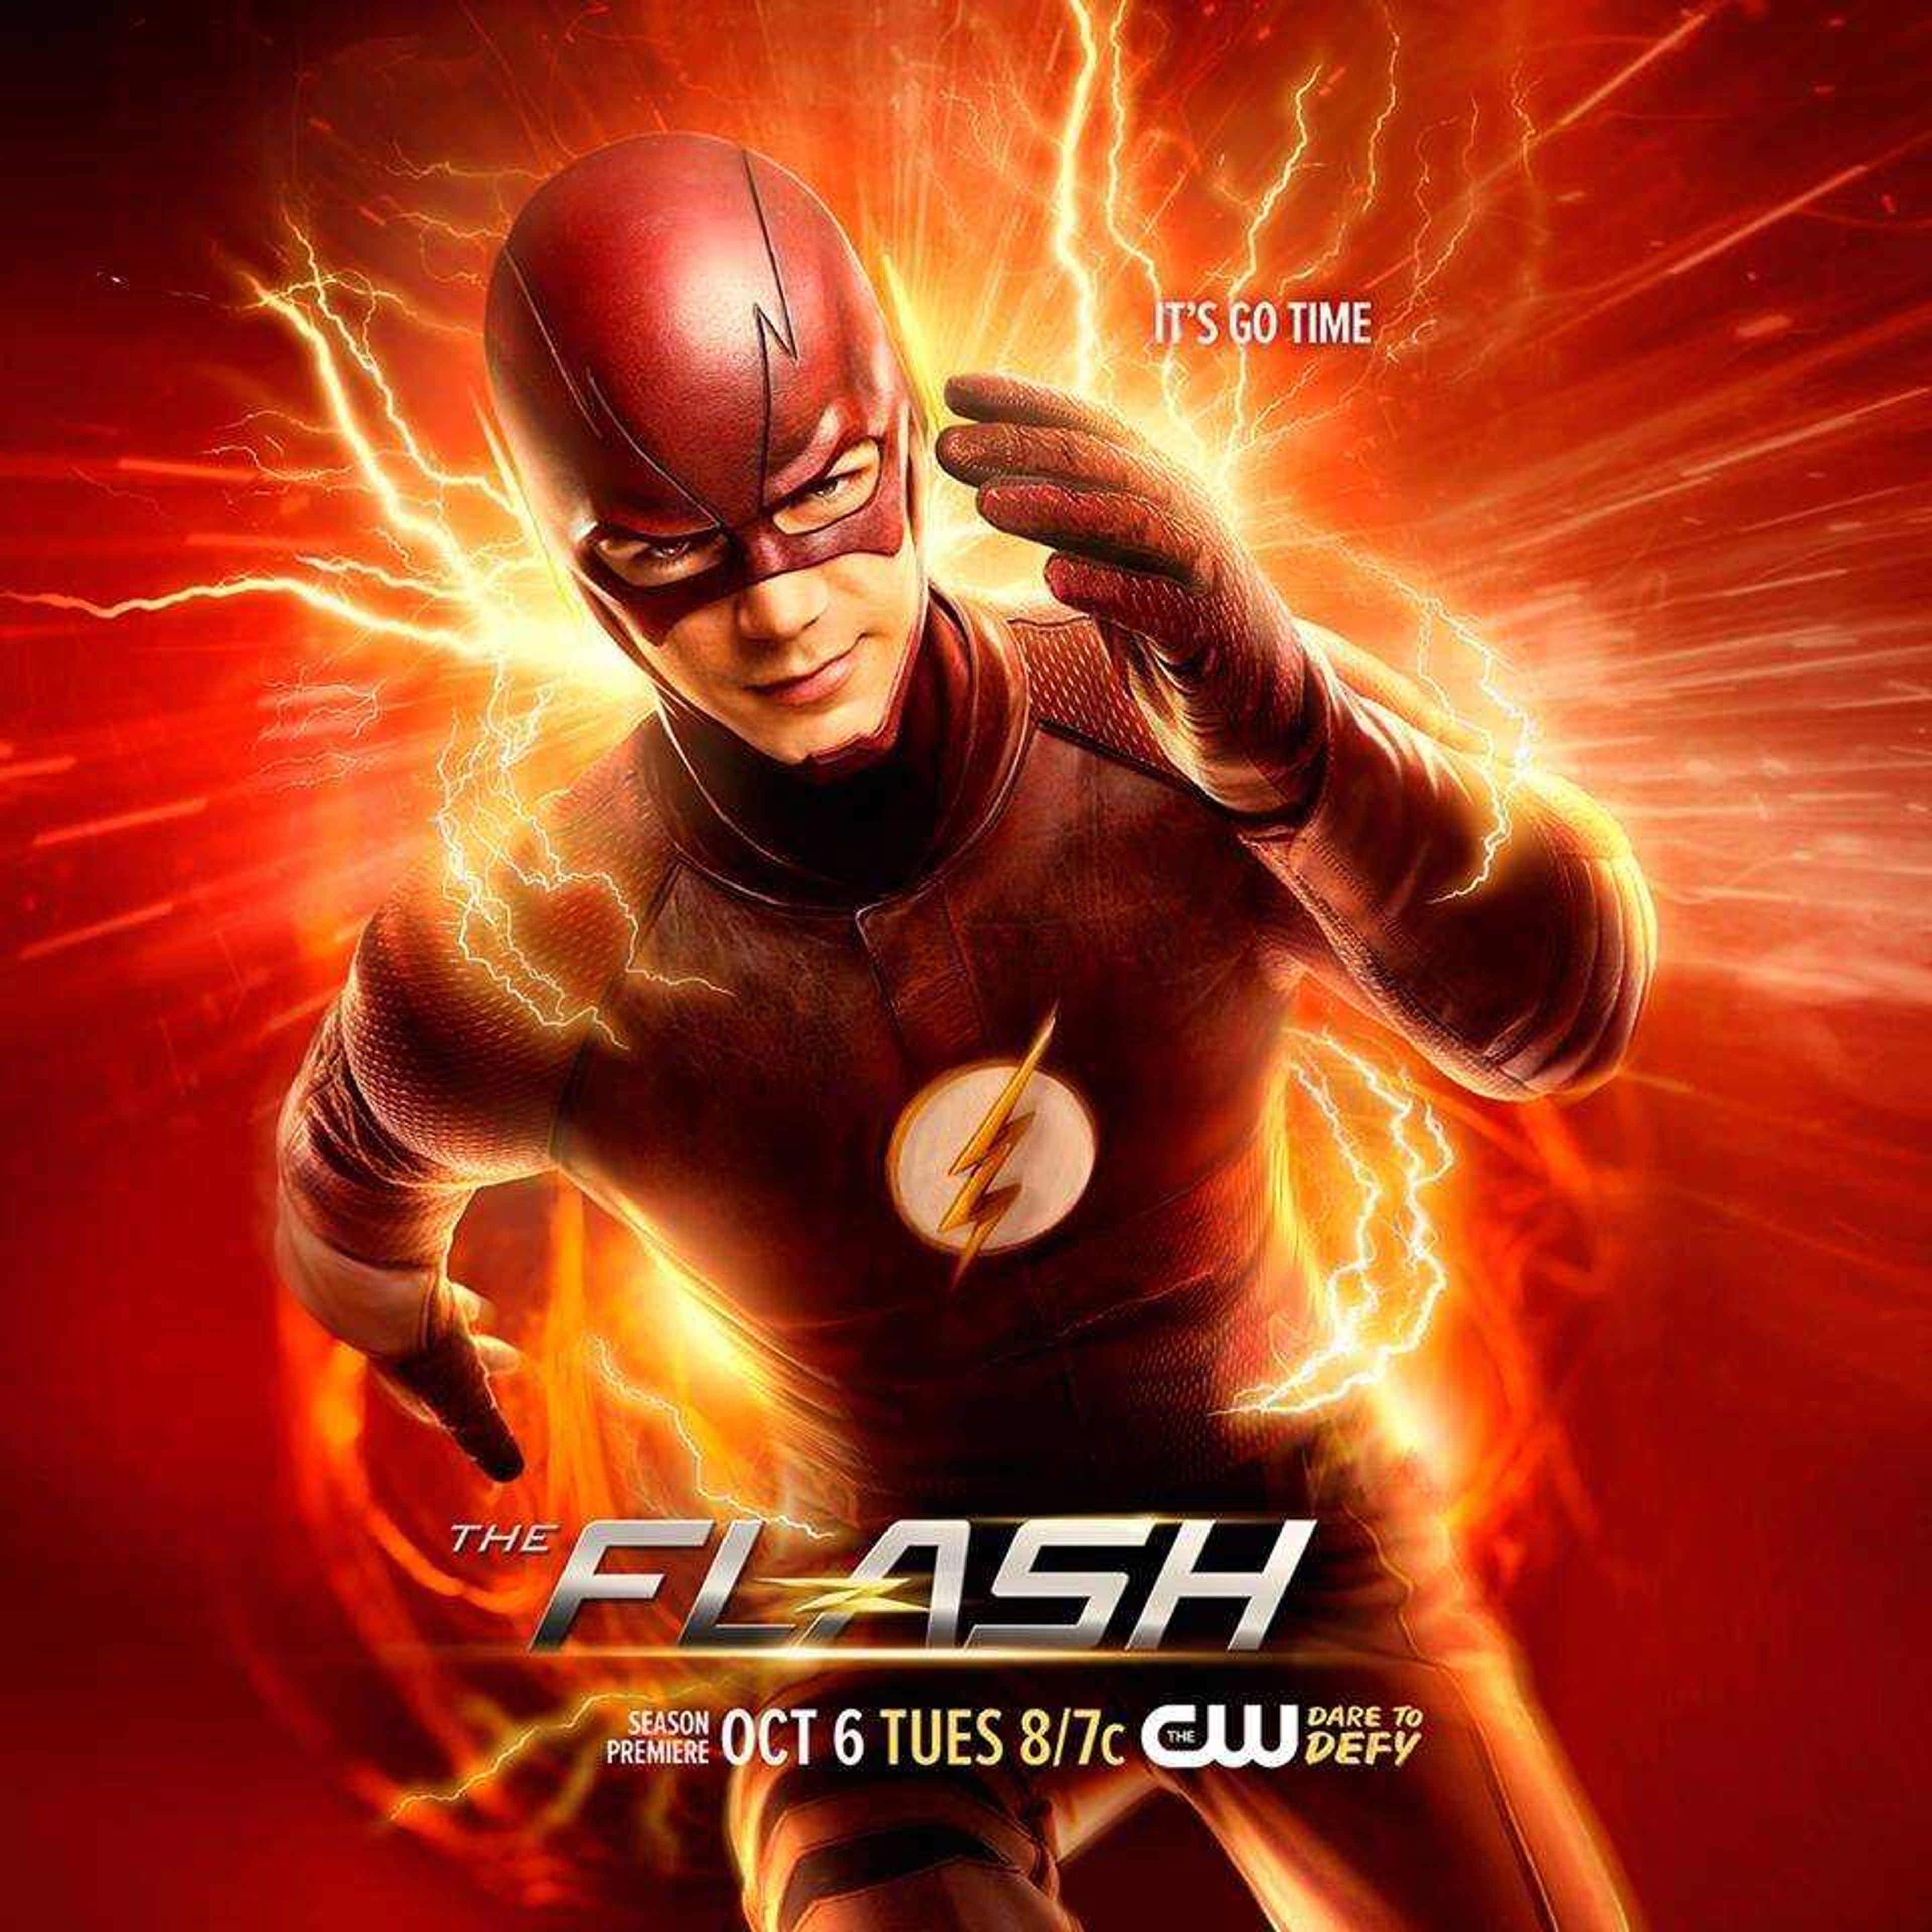 Promotional photo for season 2 of "The Flash"